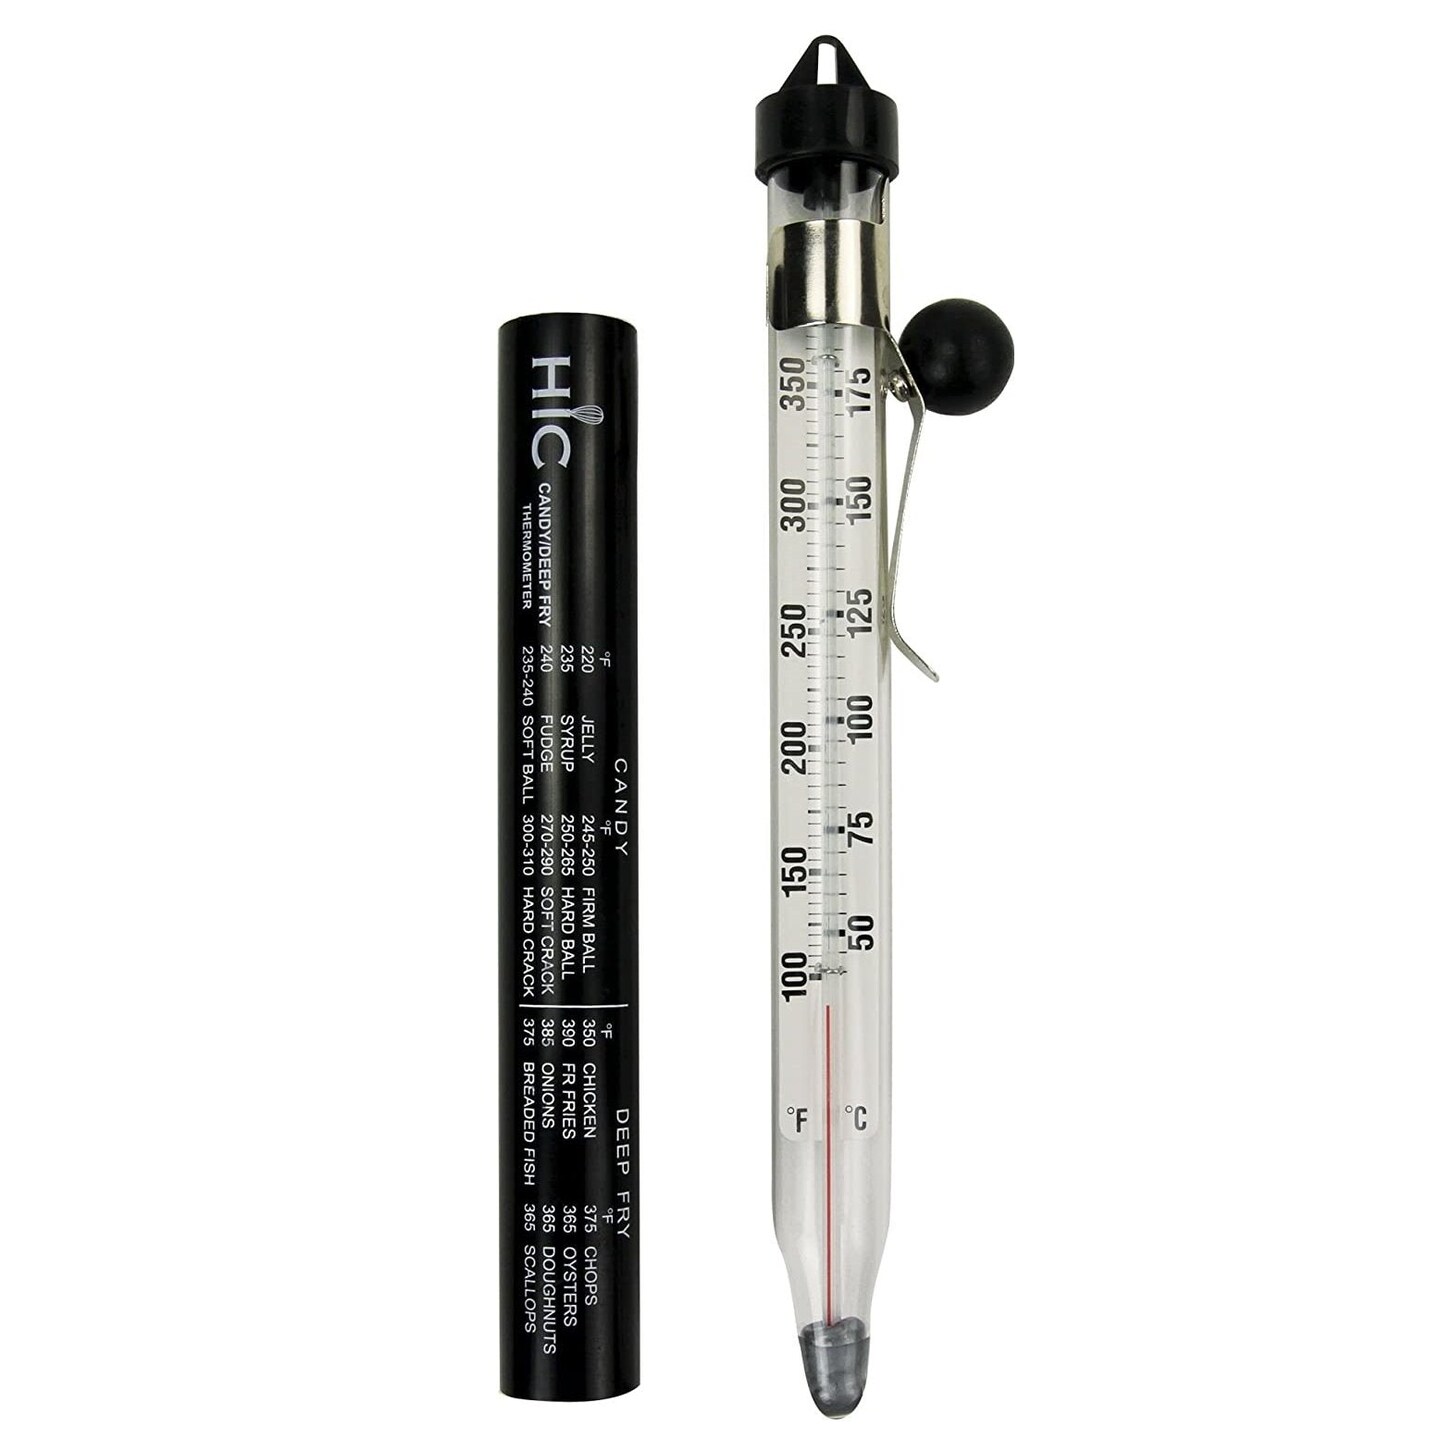 Candy Thermometers